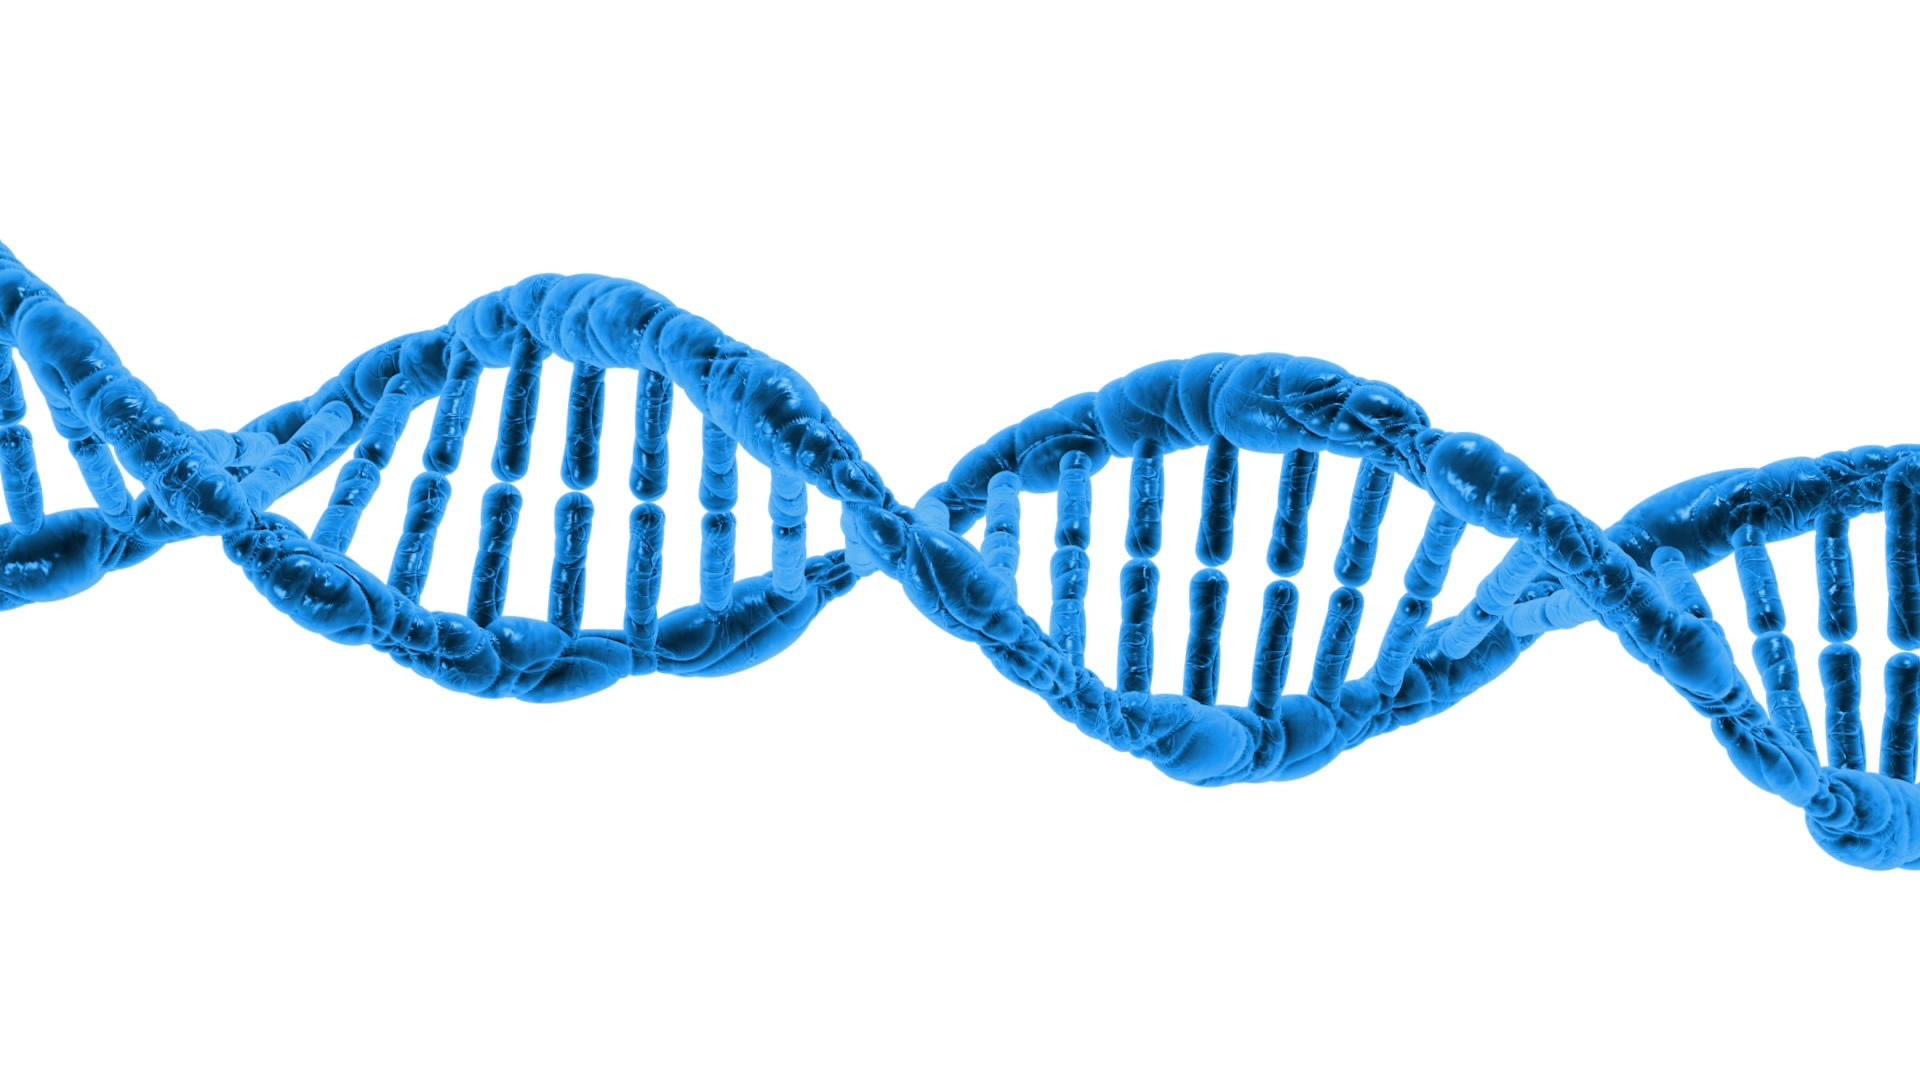 IS OUR DNA DIFFERENT OR THE SAME?